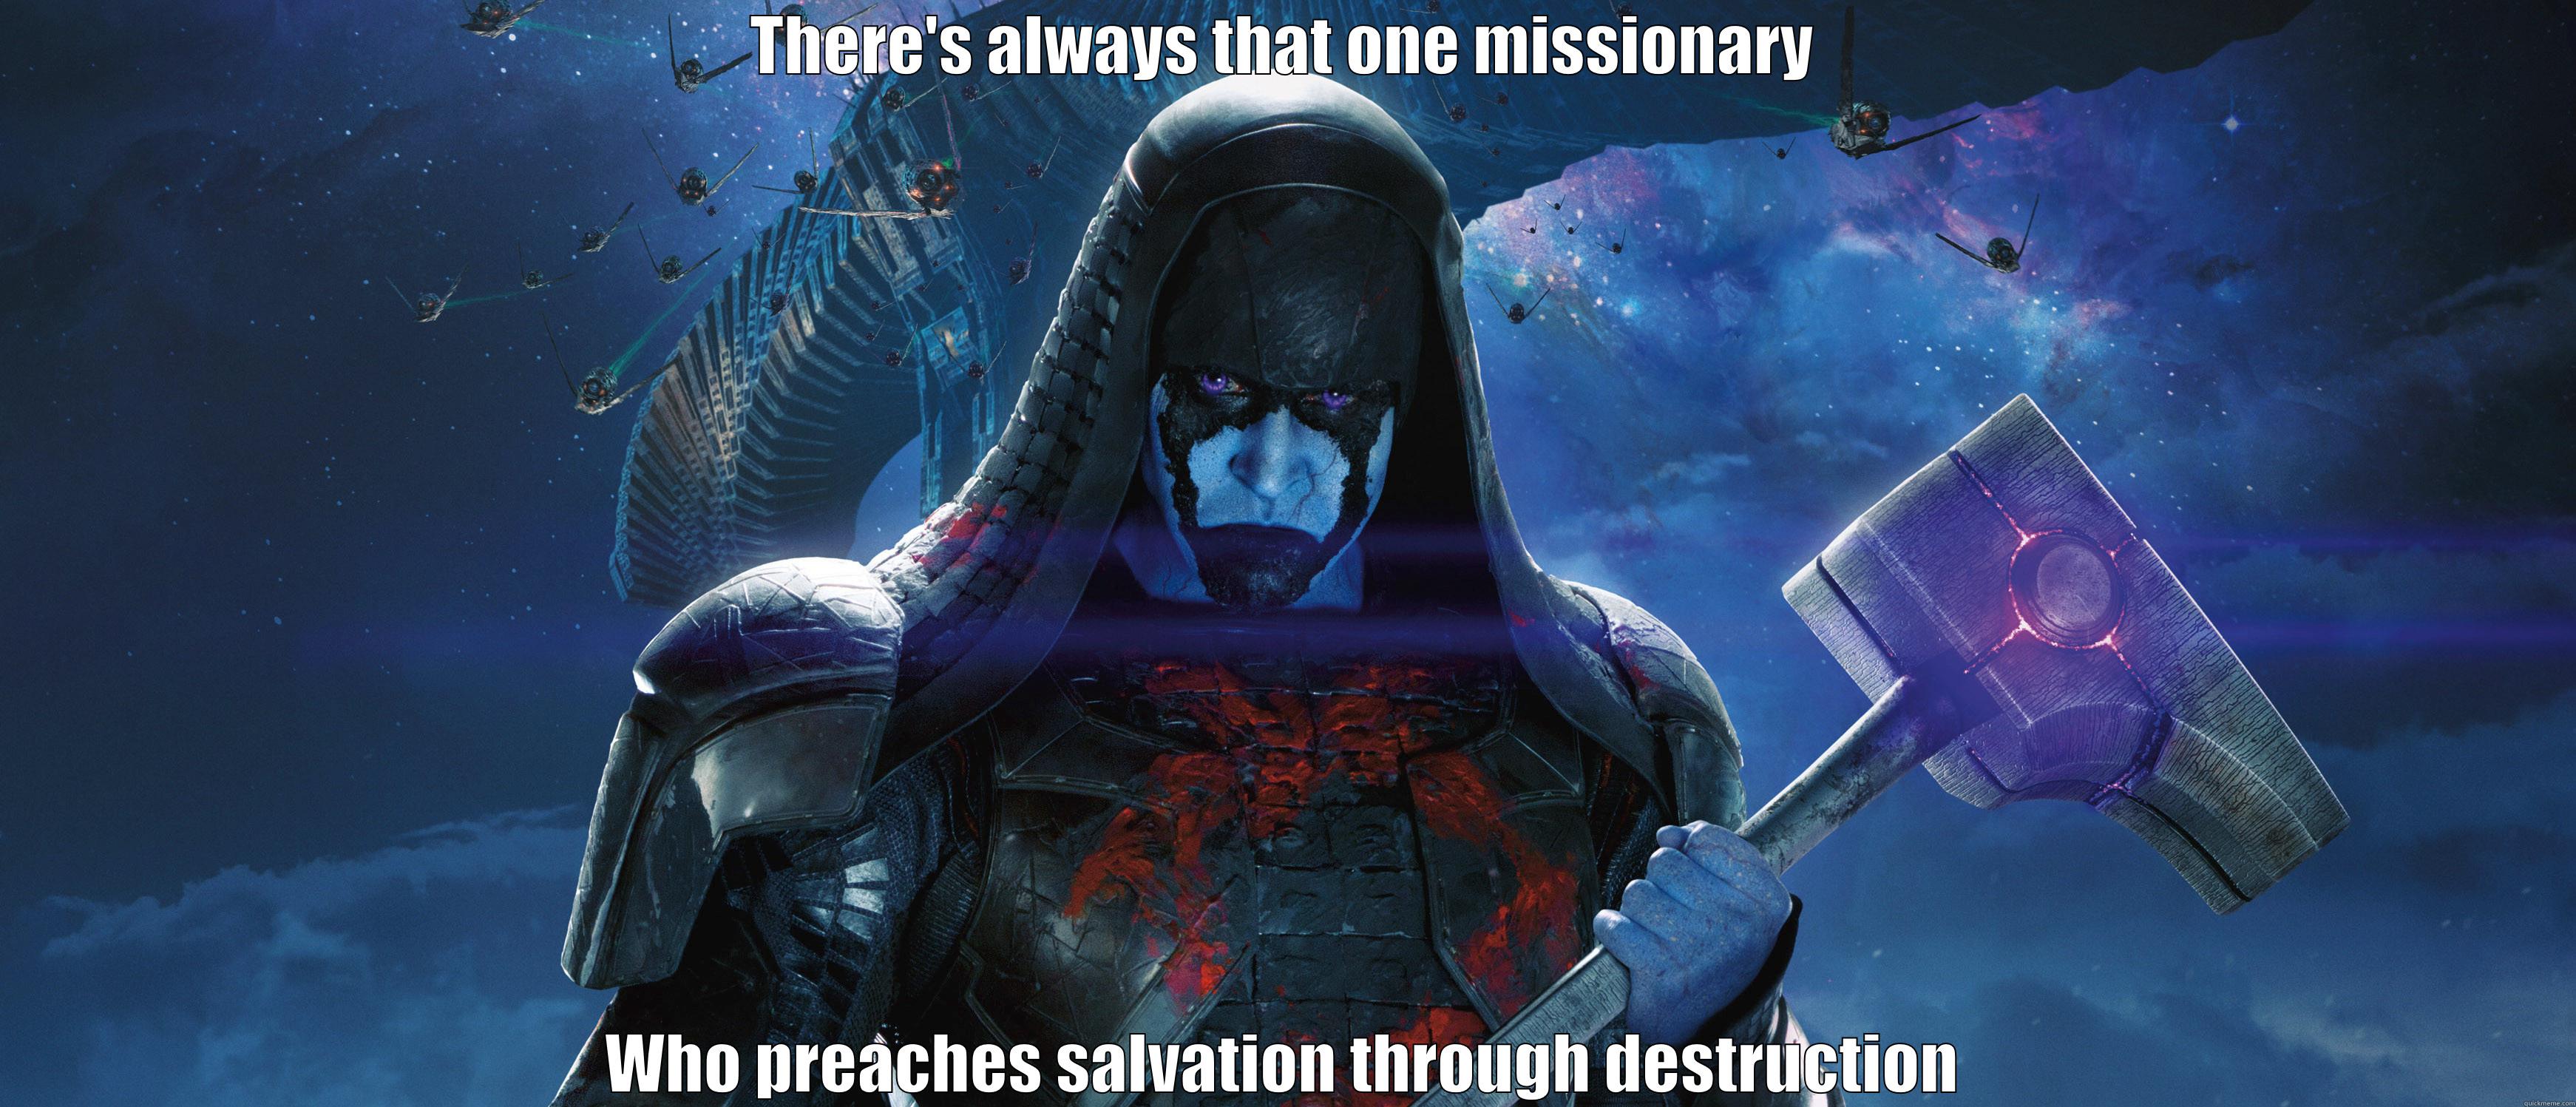 Ronan the missionary - THERE'S ALWAYS THAT ONE MISSIONARY WHO PREACHES SALVATION THROUGH DESTRUCTION Misc